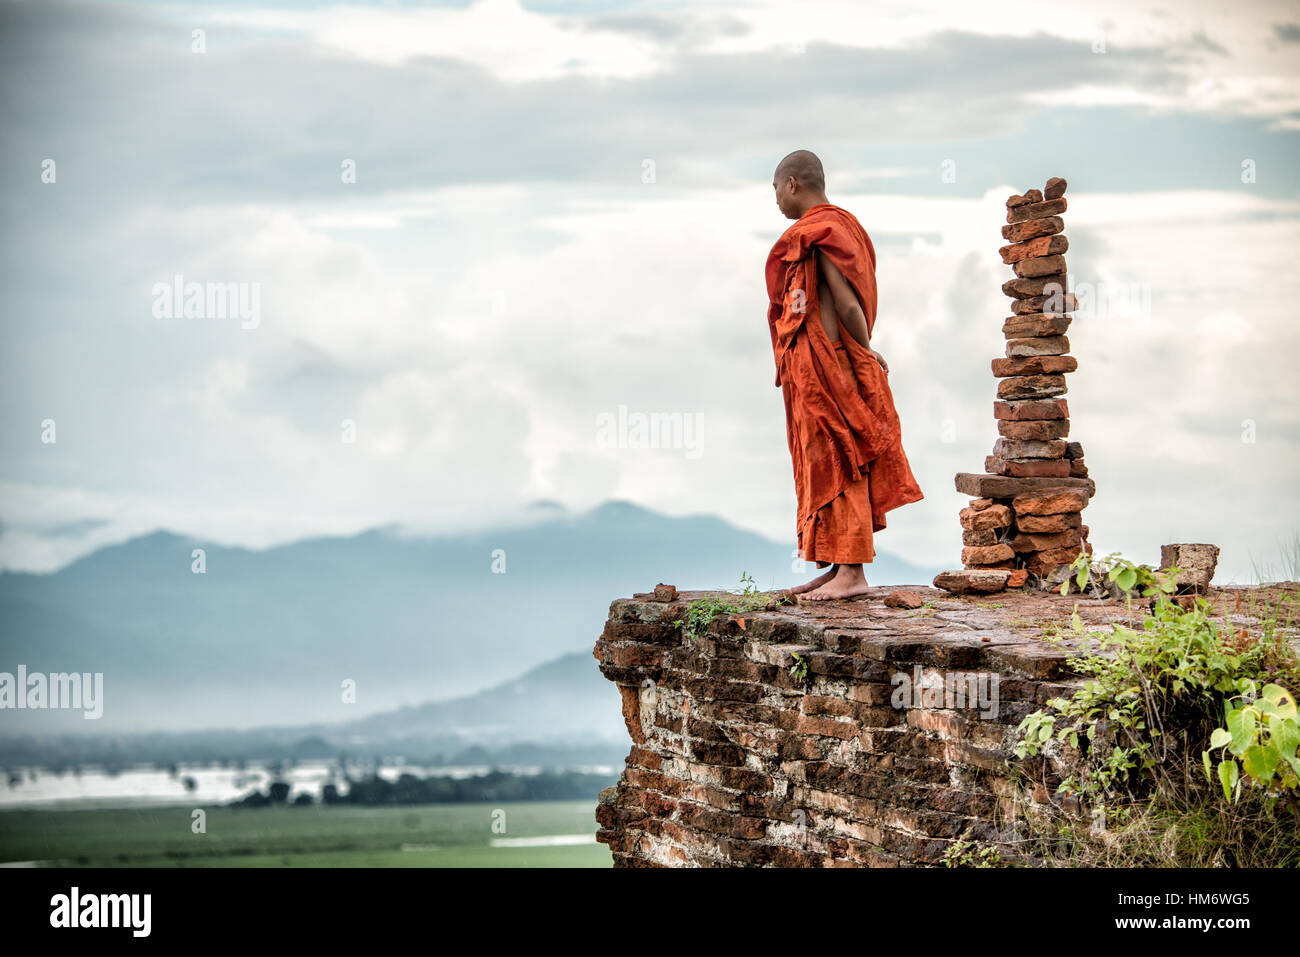 MINGUN, Myanmar - A Buddhist monk gazes out over the view of the Ayeyarwaddy River from the top of the Unfinished Pagoda in Mingun. Mingun Pahtodawgyi, also known as the Unfinished Pagoda of Mingun, was commissioned by King Bodawpaya in 1790. The current structure stands 50 meters tall; the plans called for it to reach a total height of 150 meters when completed. The structure is solid and built entirely of bricks. An earthquaker in March 1839 tore large cracks in the structure. Stock Photo